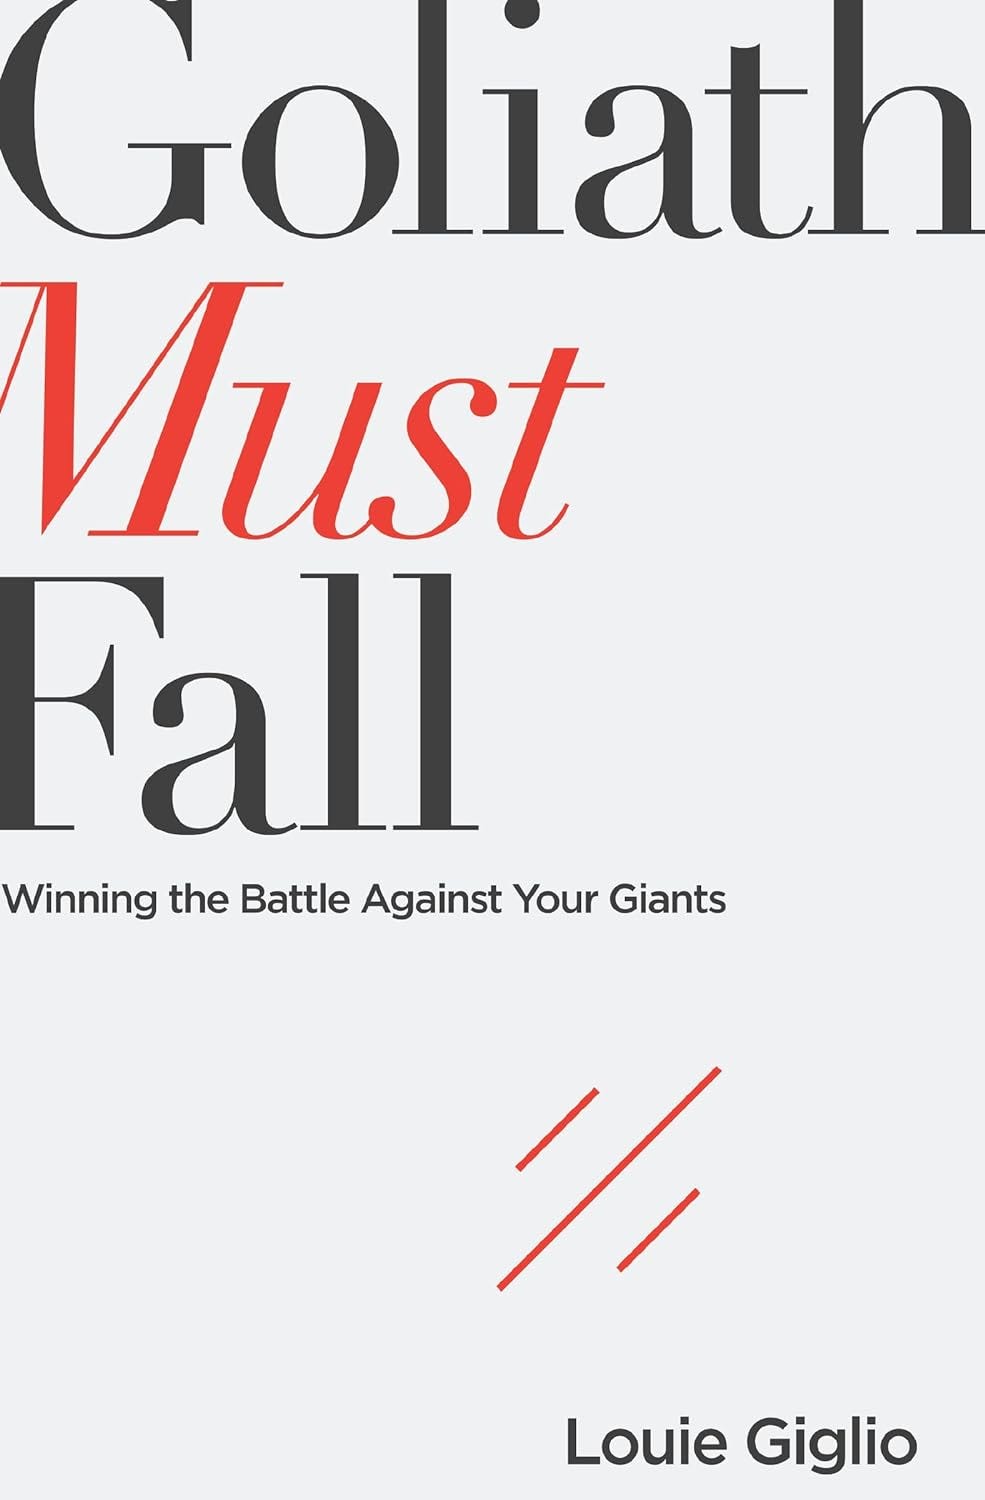 Image of the book cover of Goliath Must Fall by Louie Giglio.